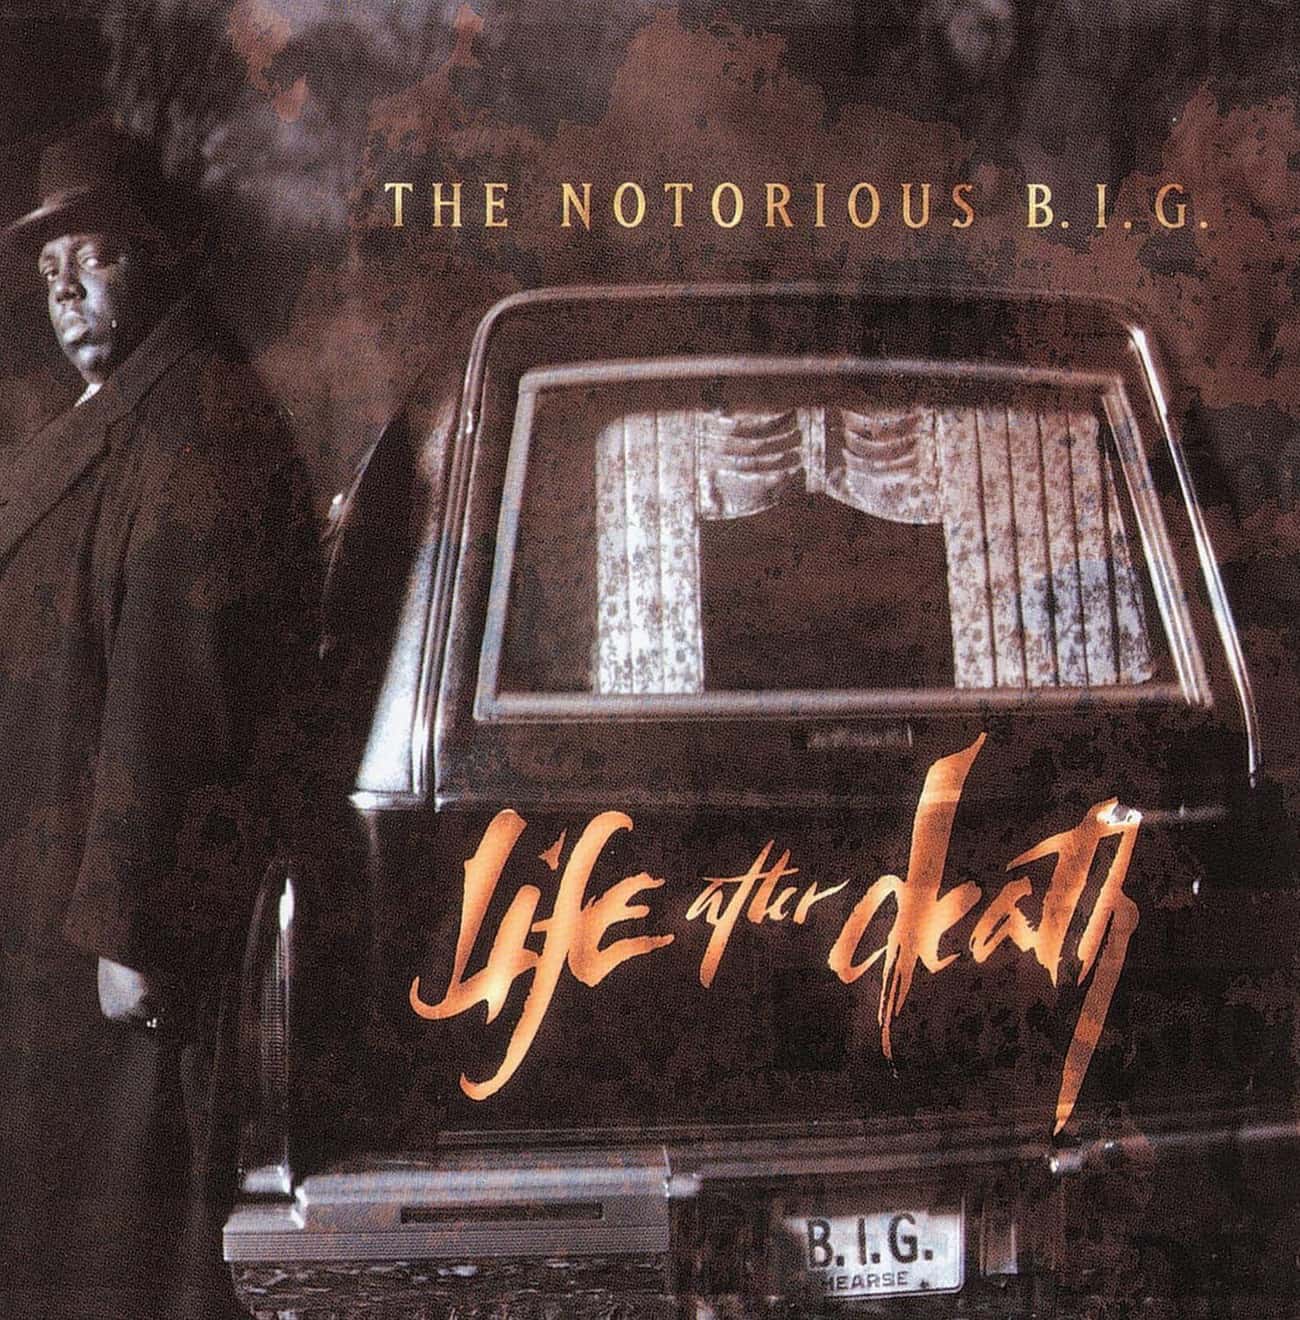 The Notorious B.I.G. - 'Life After Death'